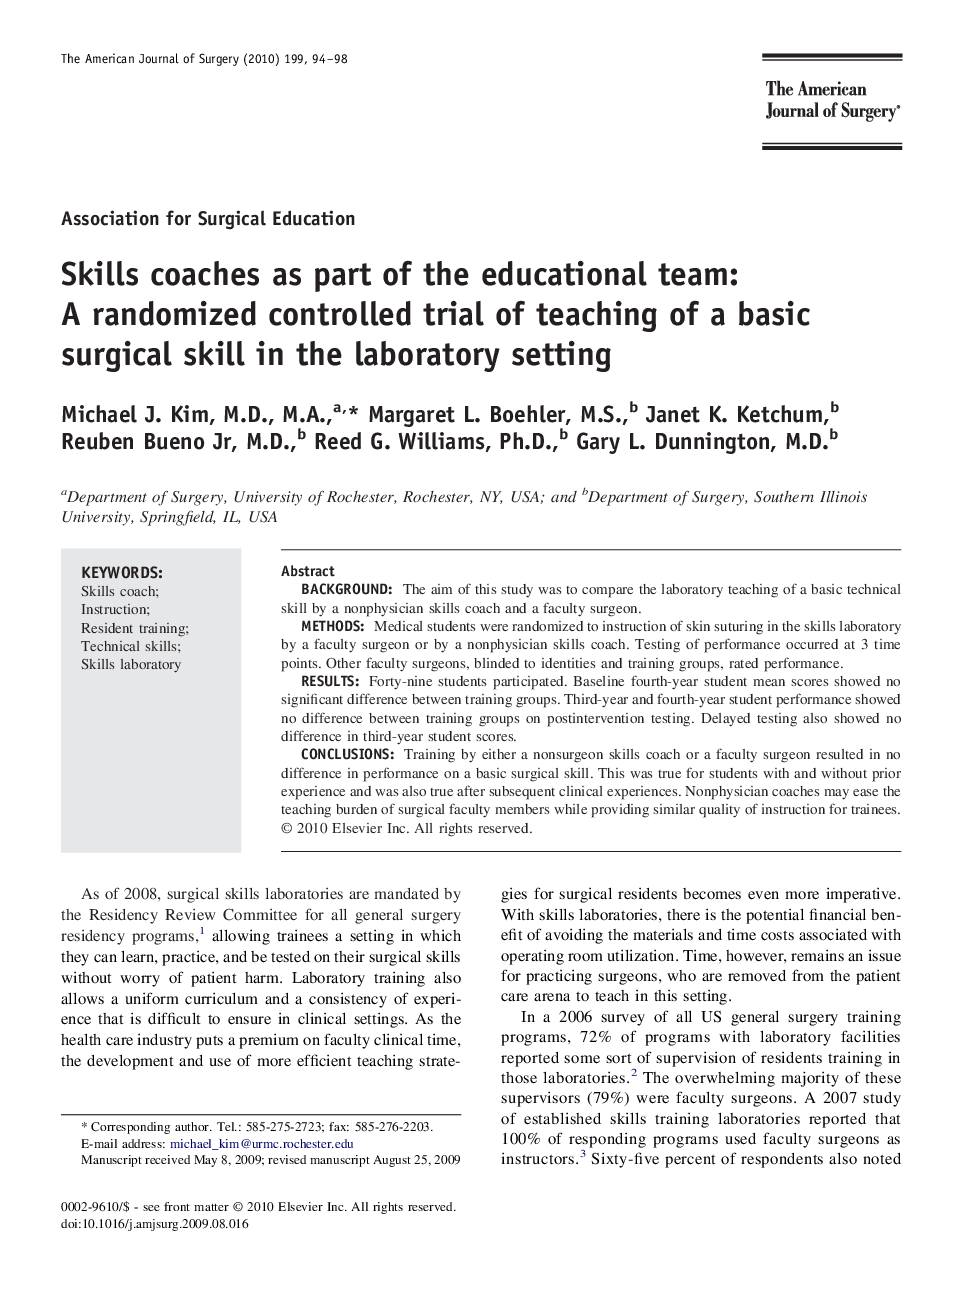 Skills coaches as part of the educational team: A randomized controlled trial of teaching of a basic surgical skill in the laboratory setting